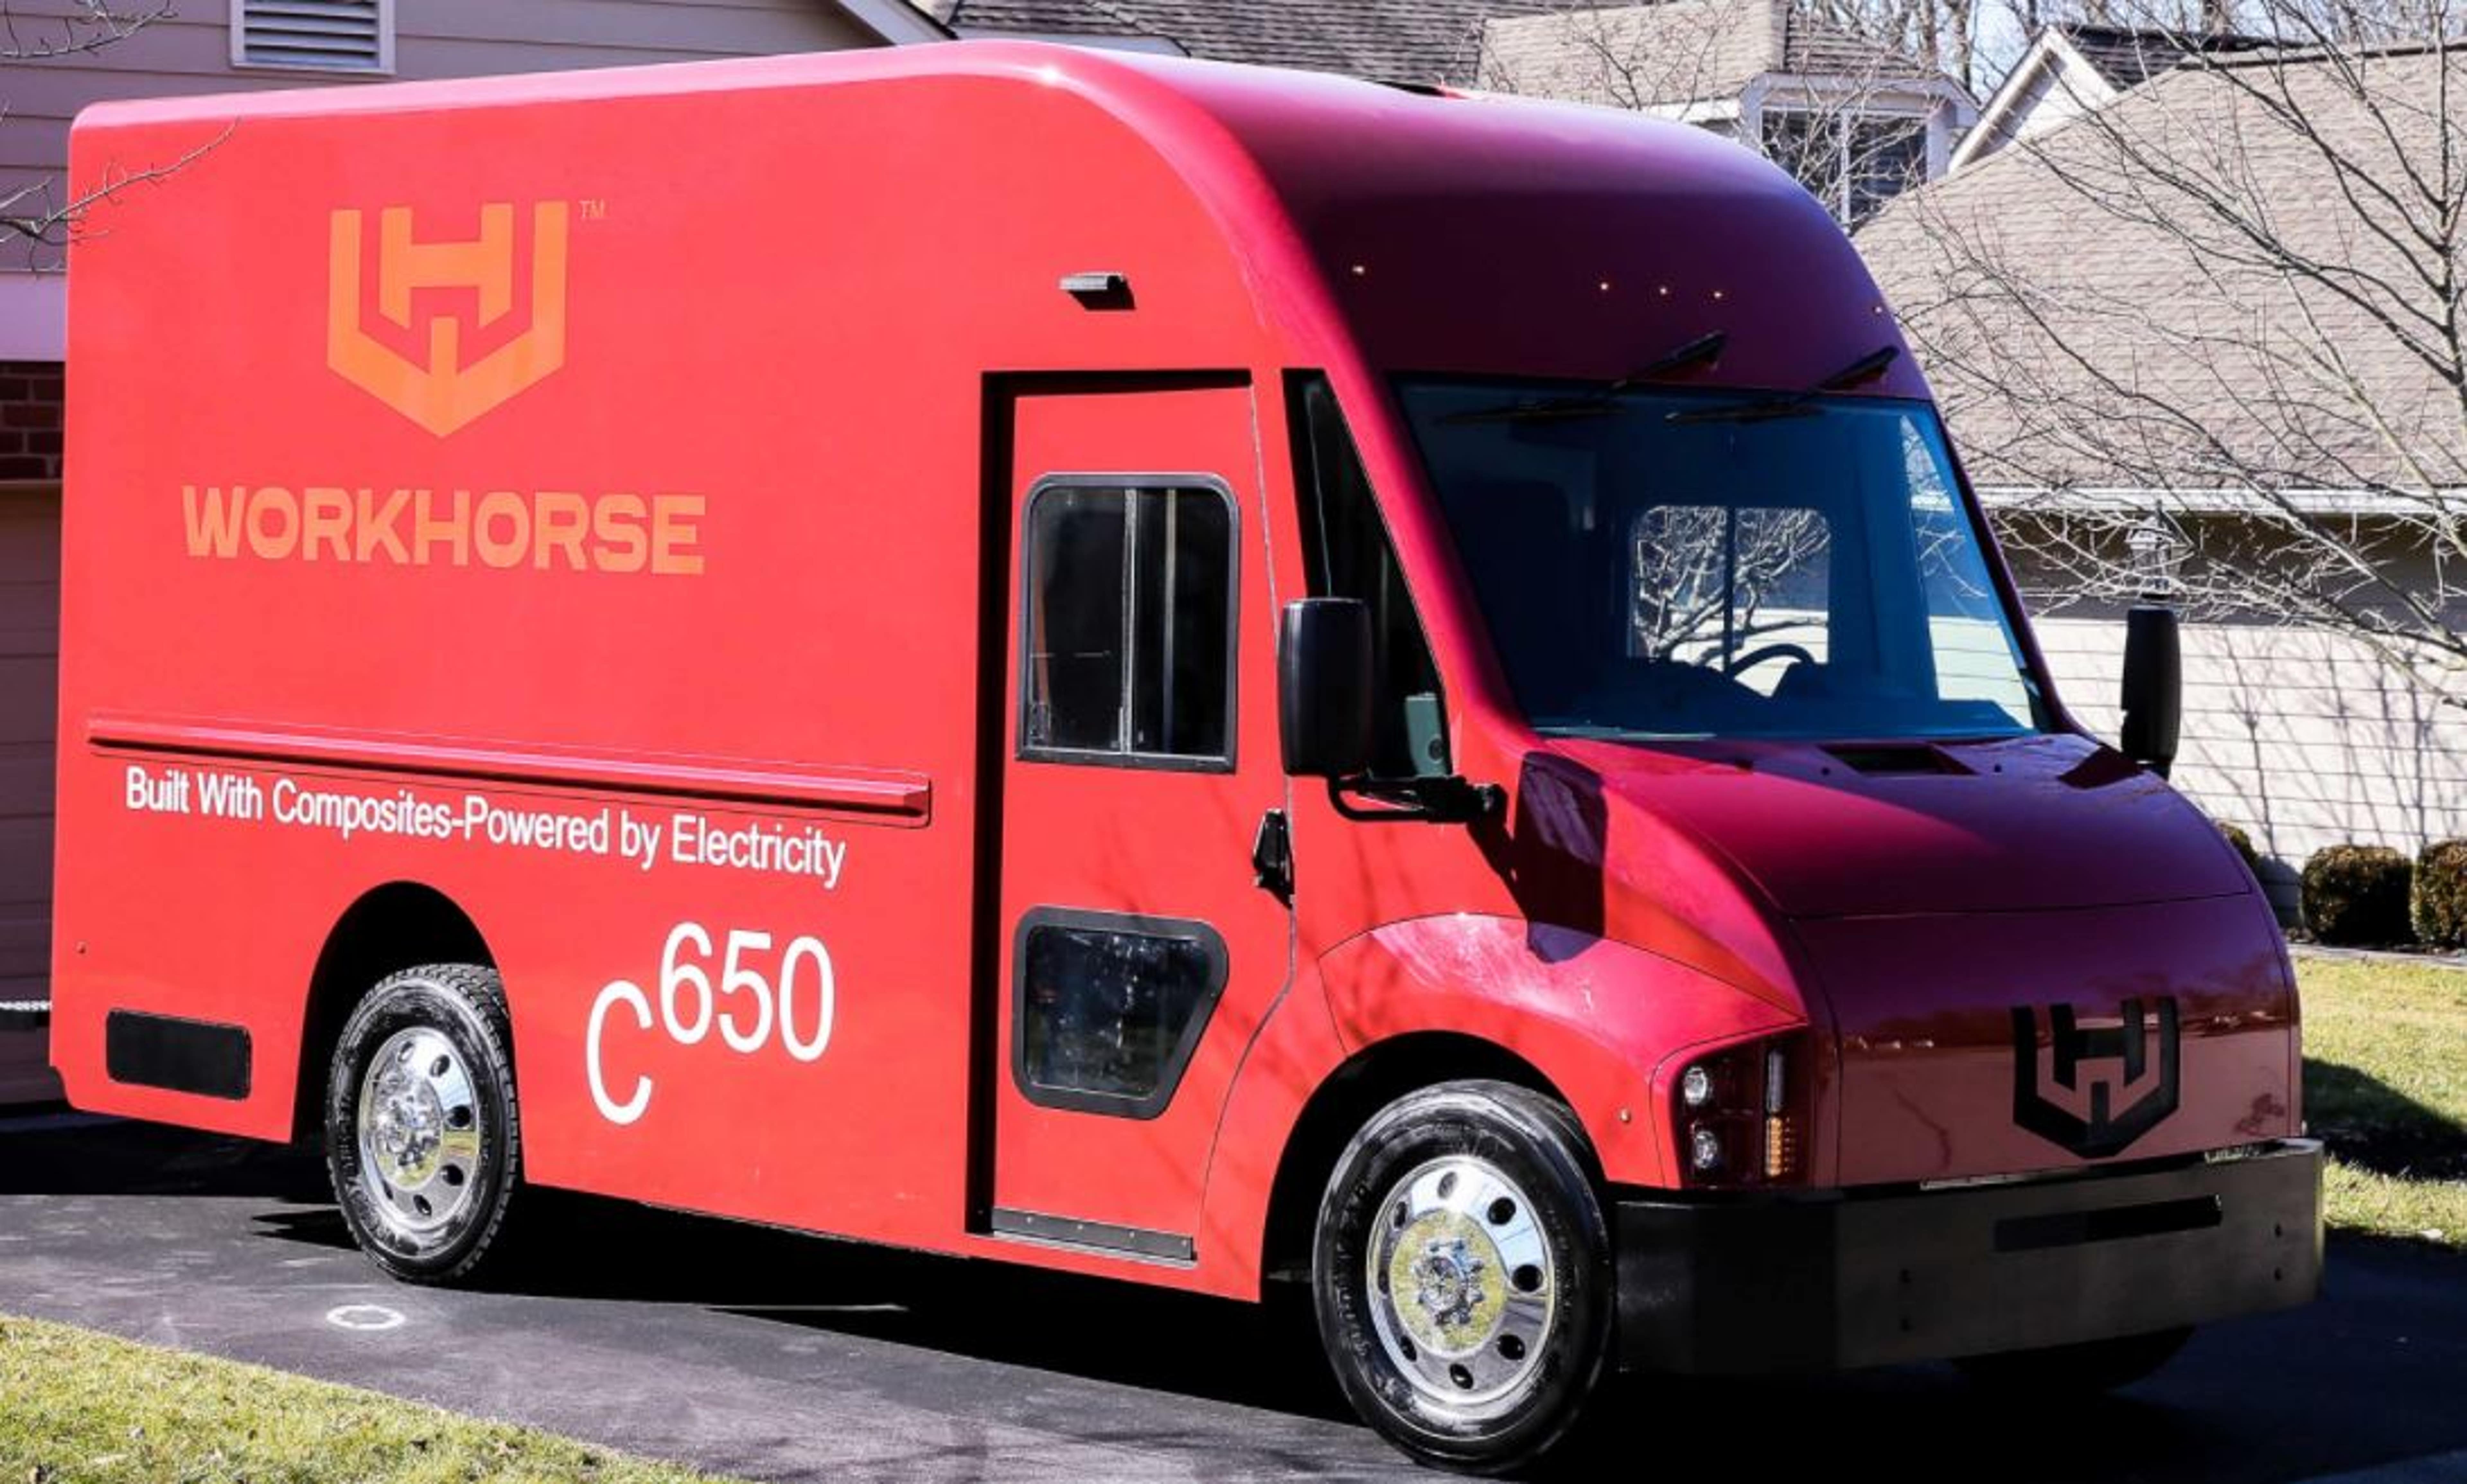 Workhorse Lawyers Up In Mail Truck Contract Dispute With Postal Service